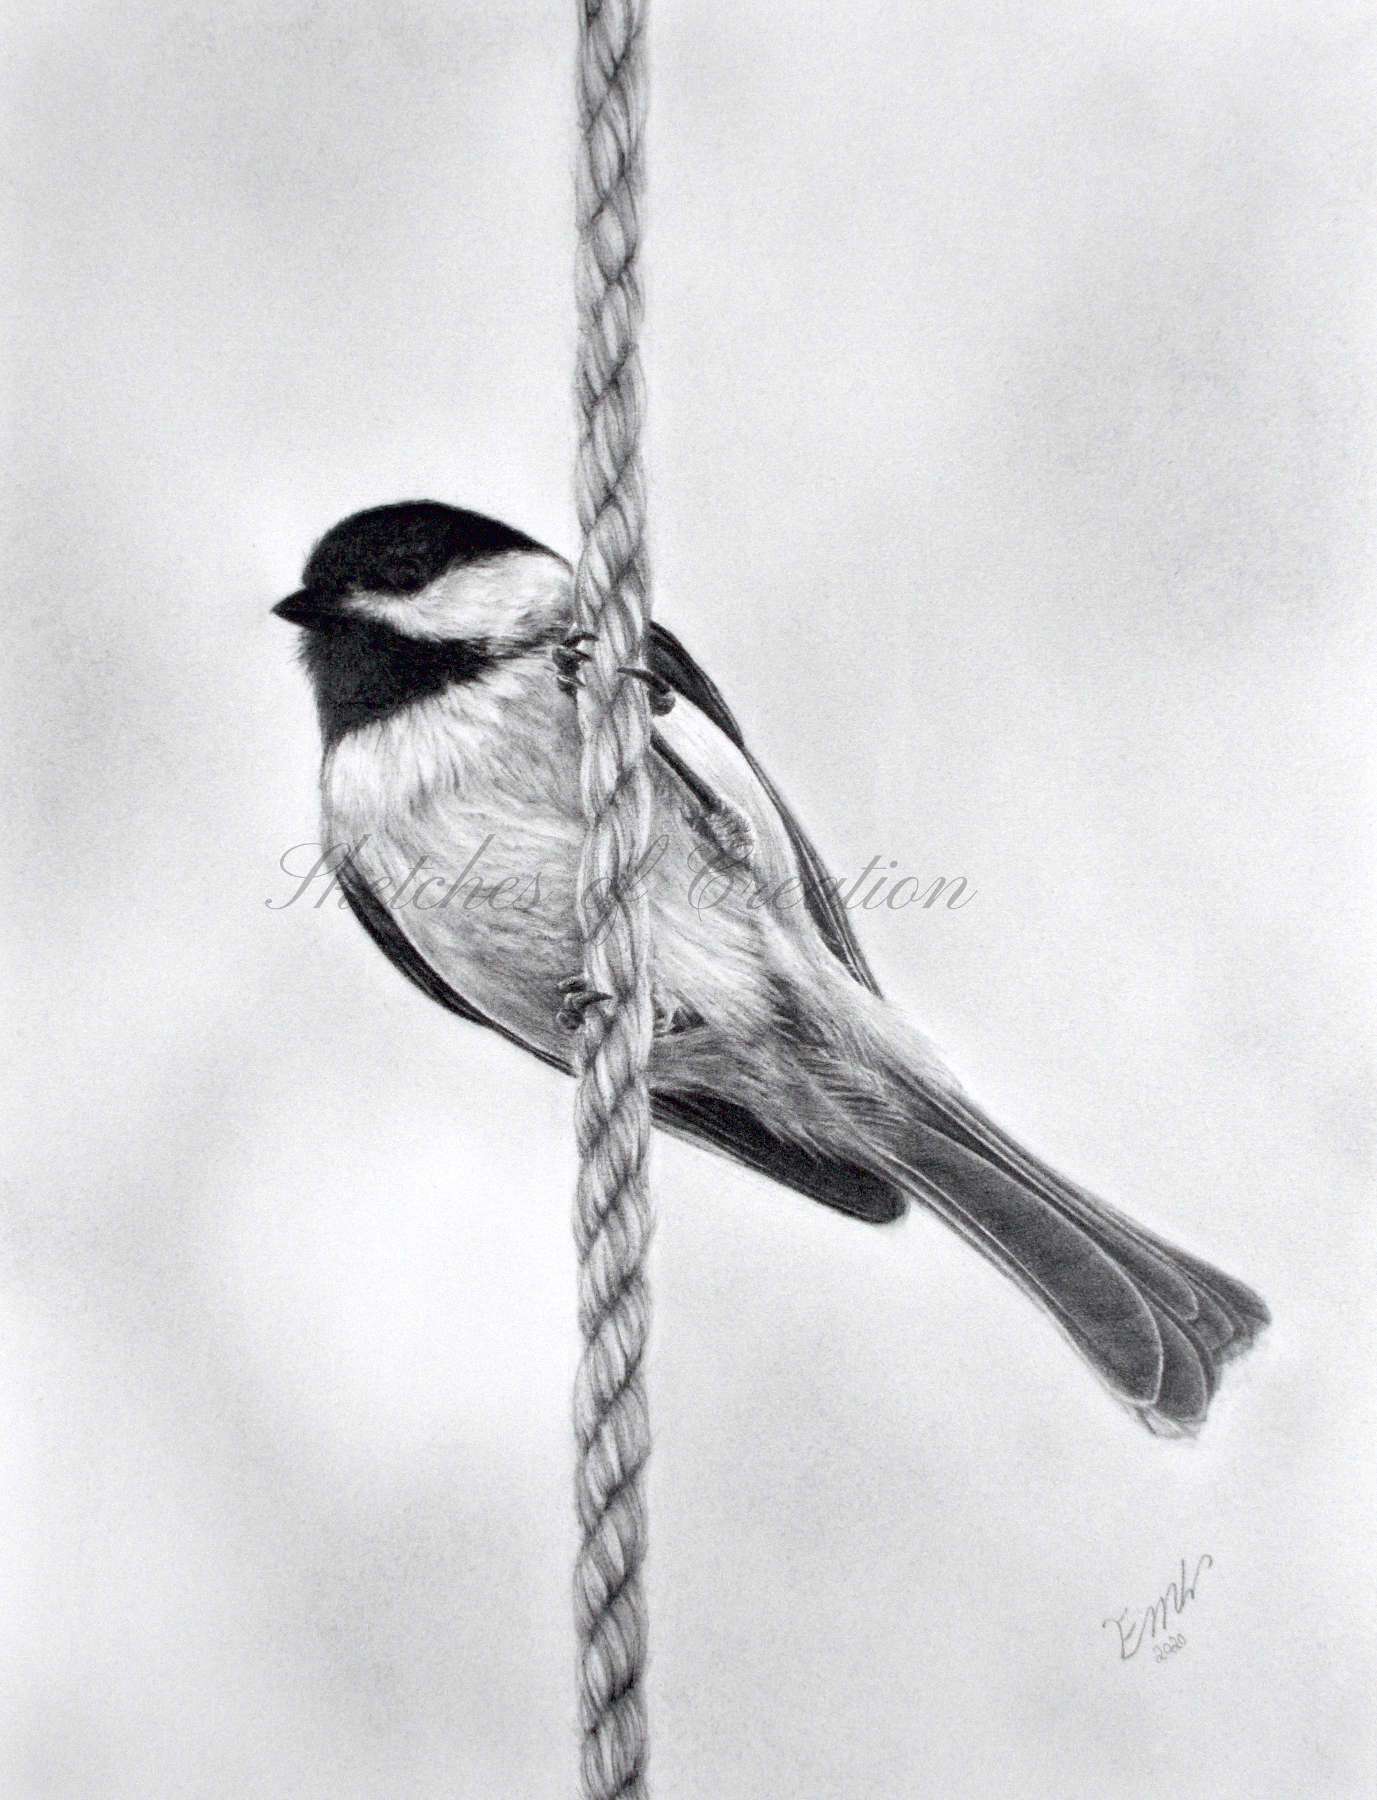 'Lookout' a drawing of a chickadee on a rope. 6x8 inches. Completed November 2020